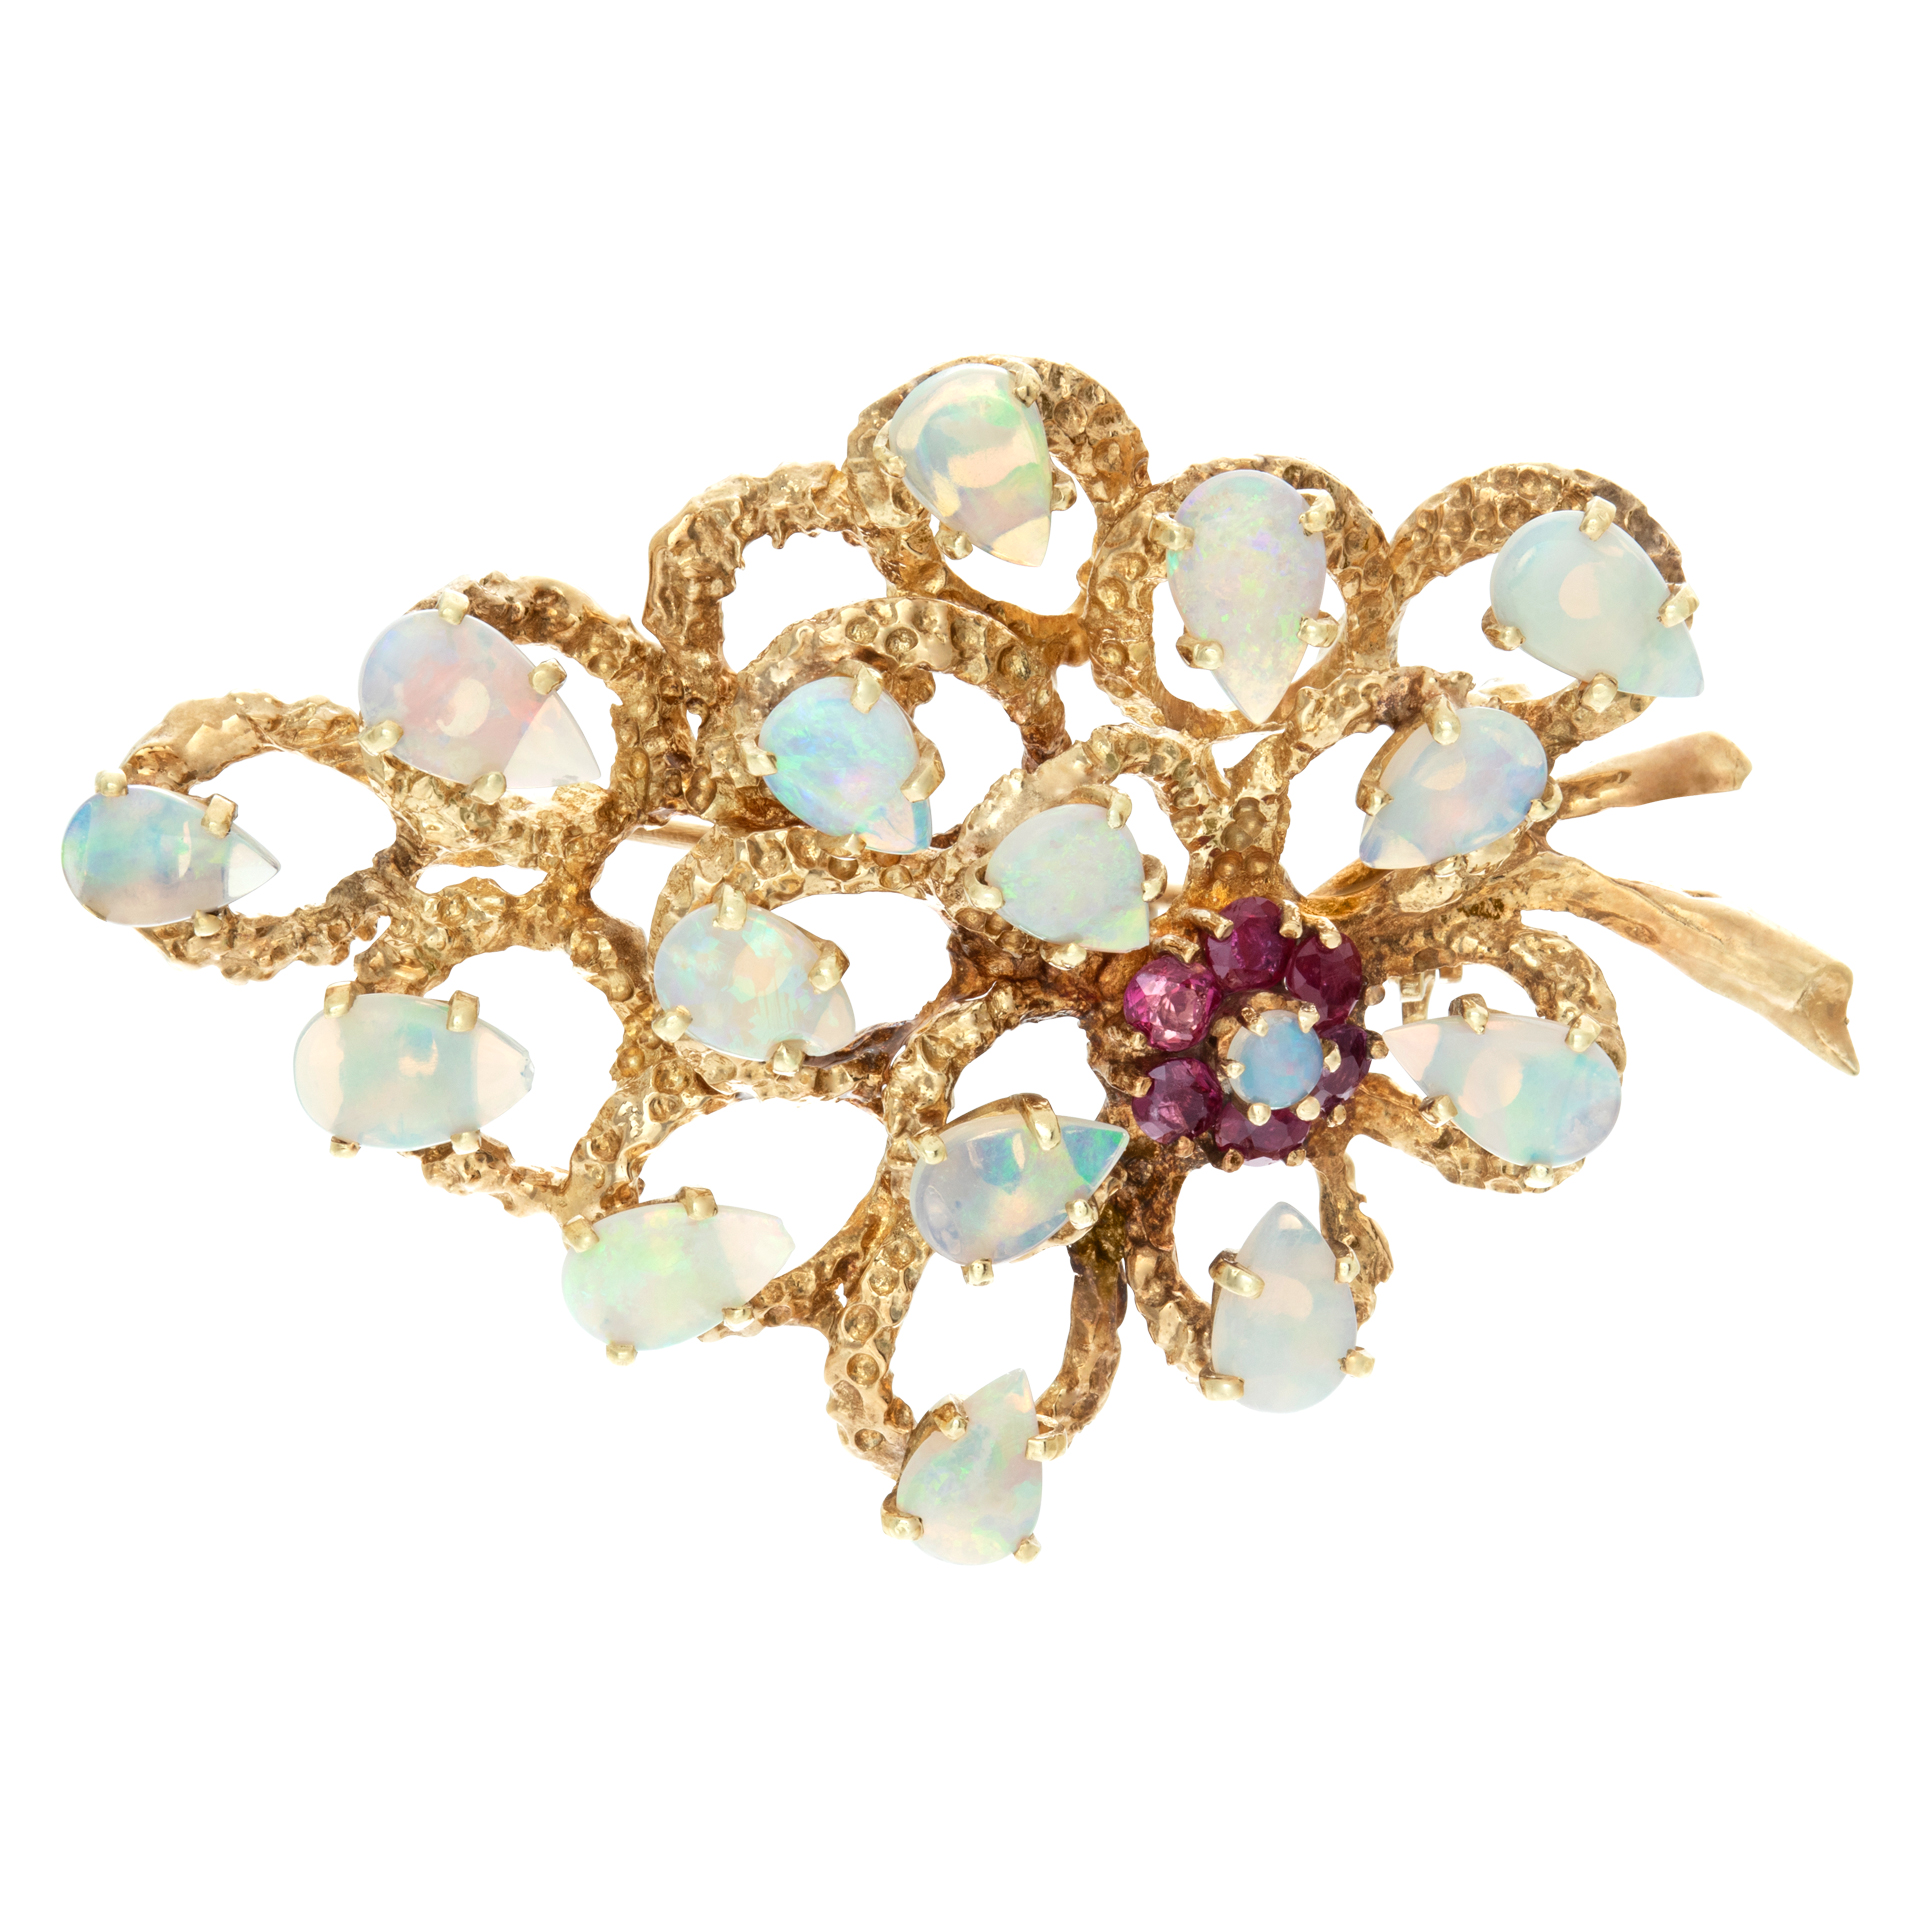 Vintage leaf broach with 15 pear shape Opal set in 14k yellow gold with ruby accents